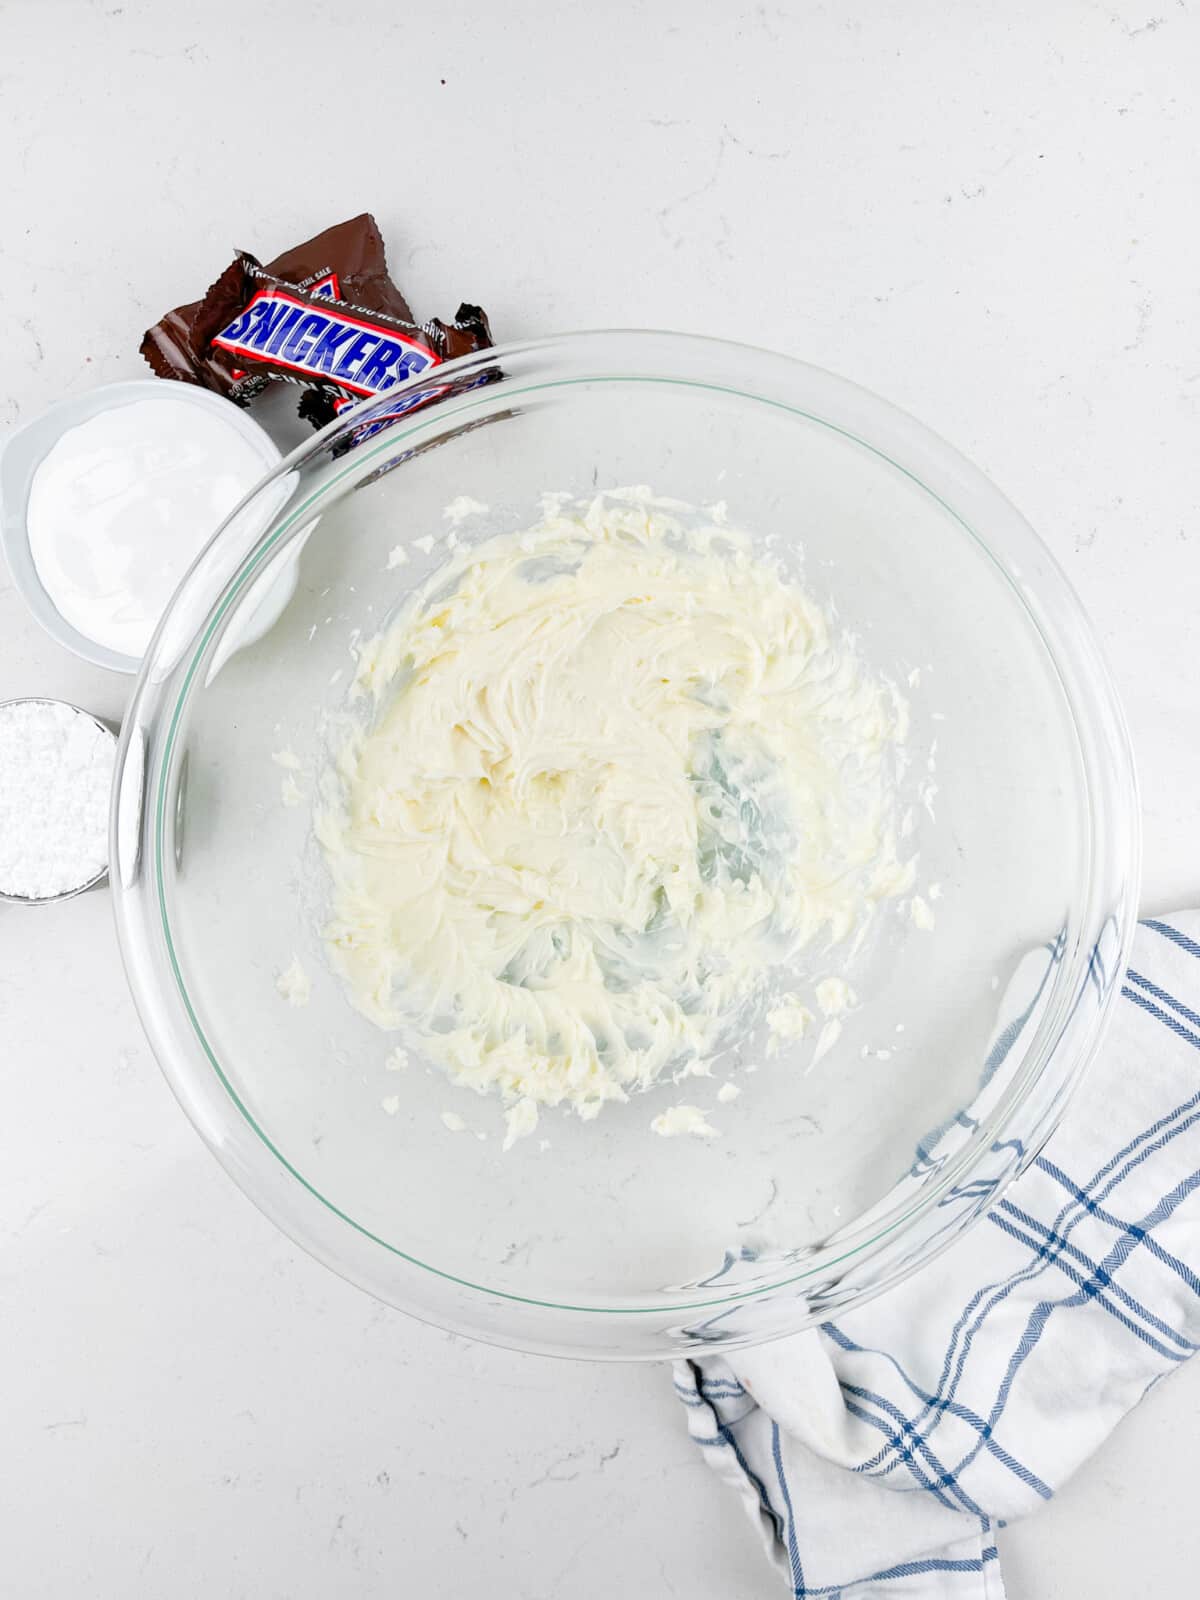 process shot of snickers dip being made on a white marble counter.